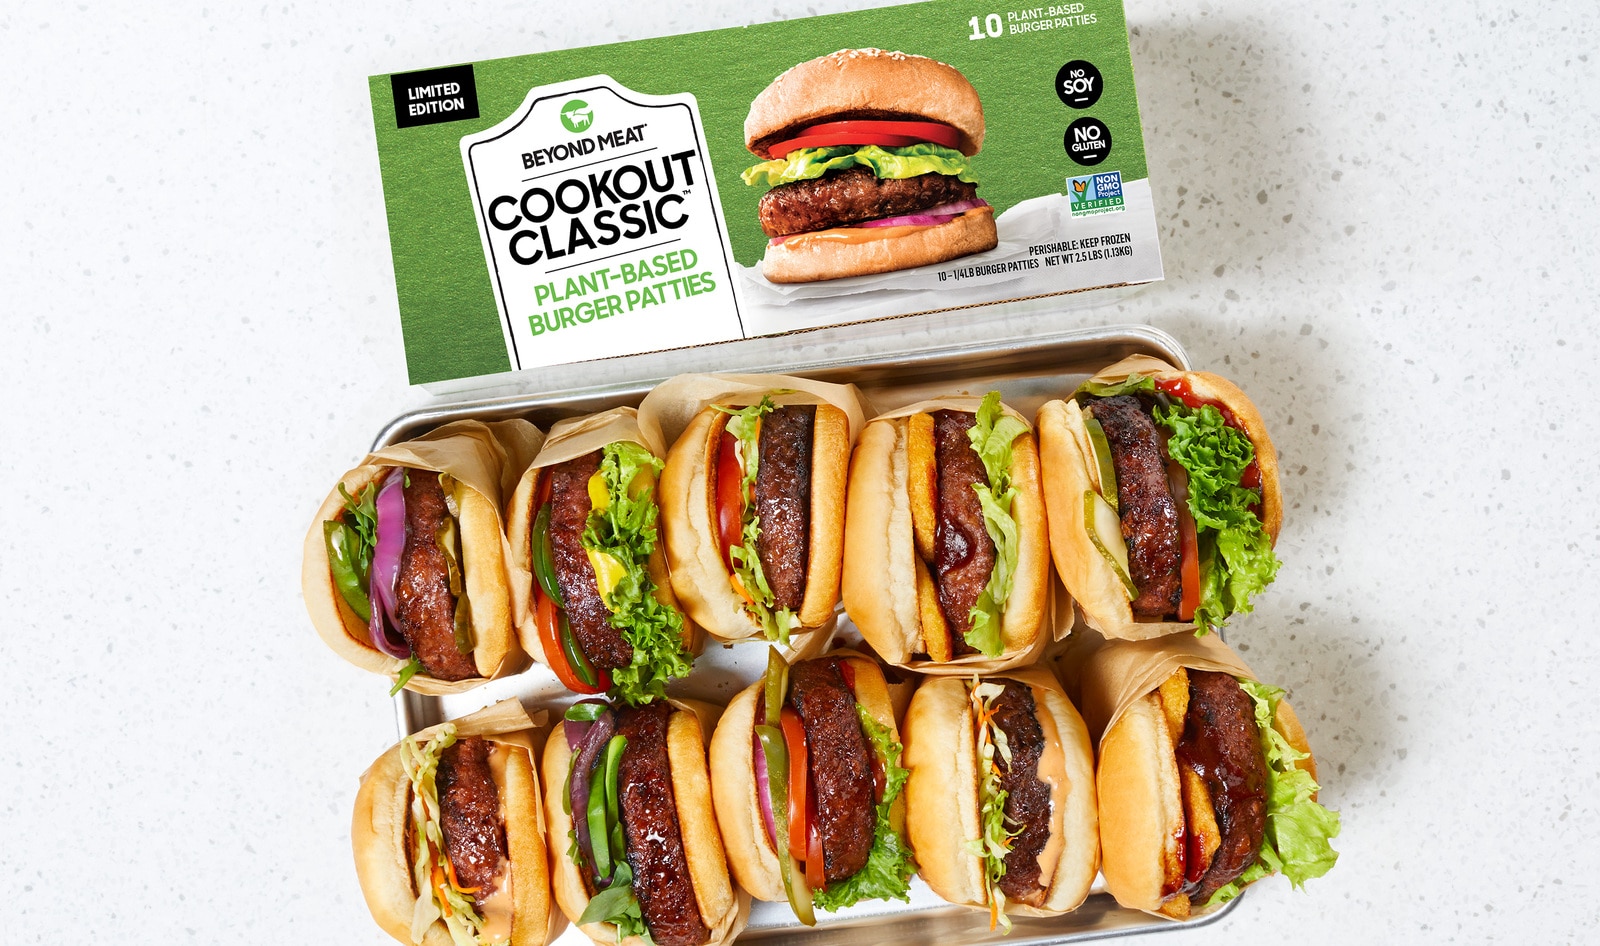 Beyond Meat’s New Bulk Pack Slashes Beyond Burger Price to Just $1.60 Per Patty&nbsp;